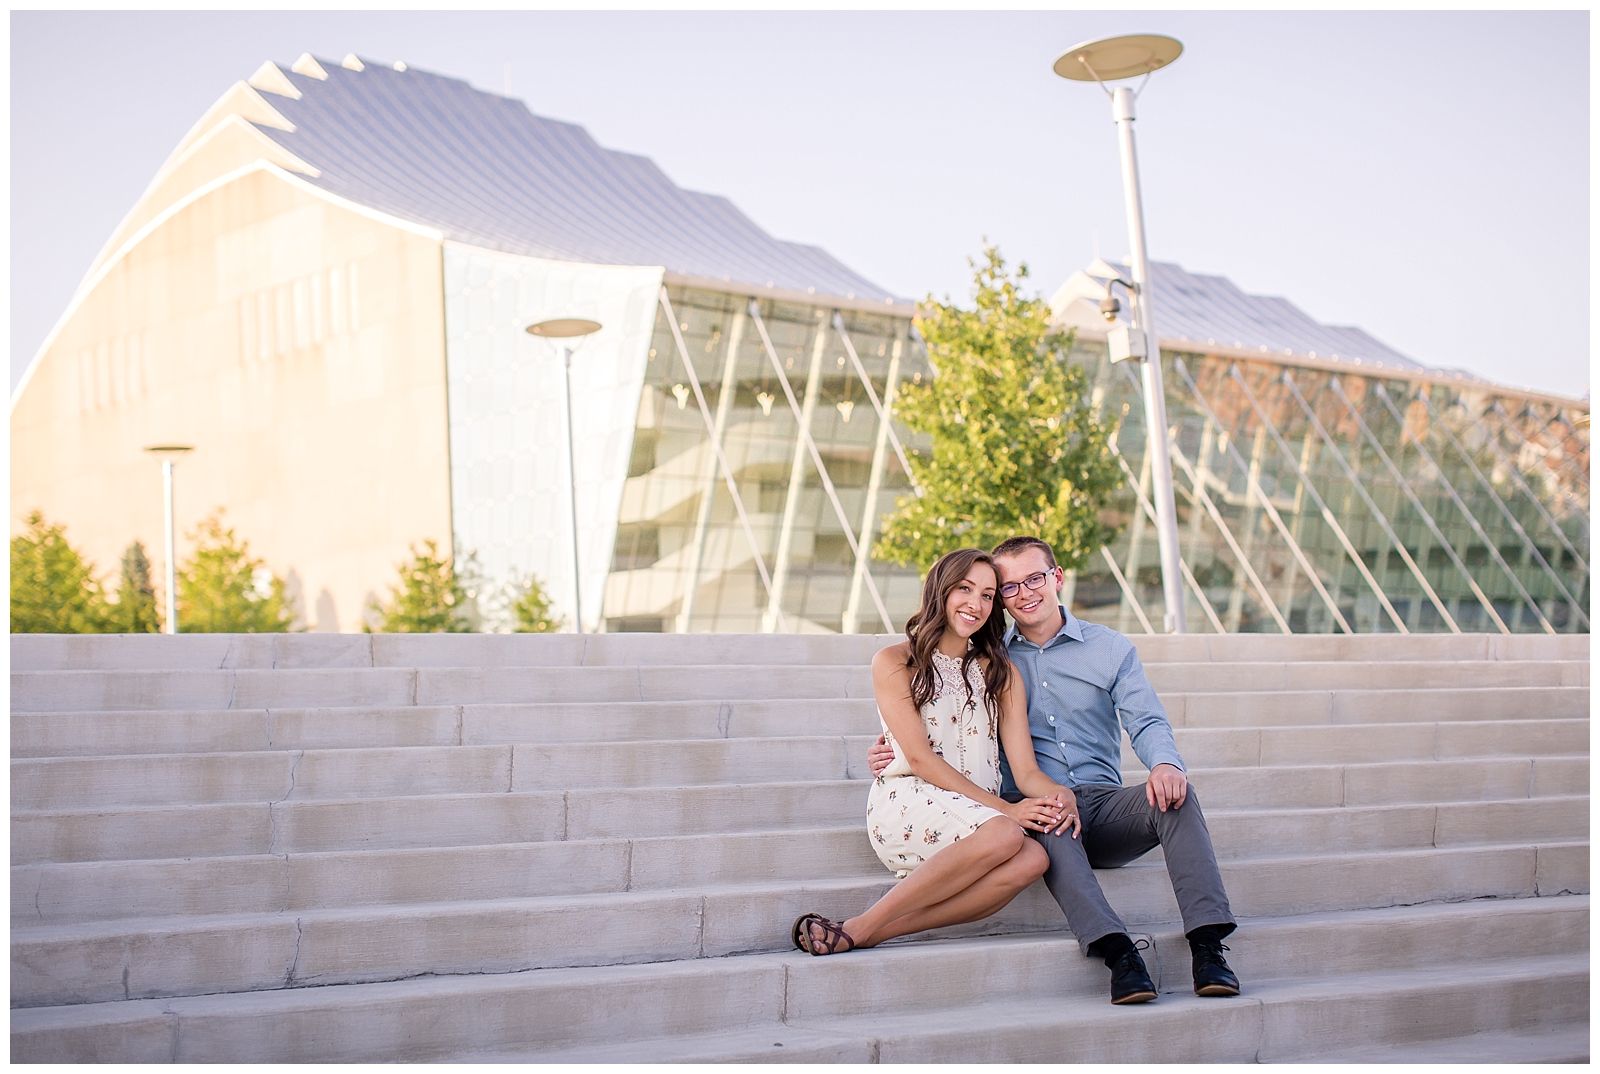 Engagement photography at the Kauffman Center for the Performing Arts and the Crossroads Arts District by Kansas City wedding photographers Wisdom-Watson Weddings.